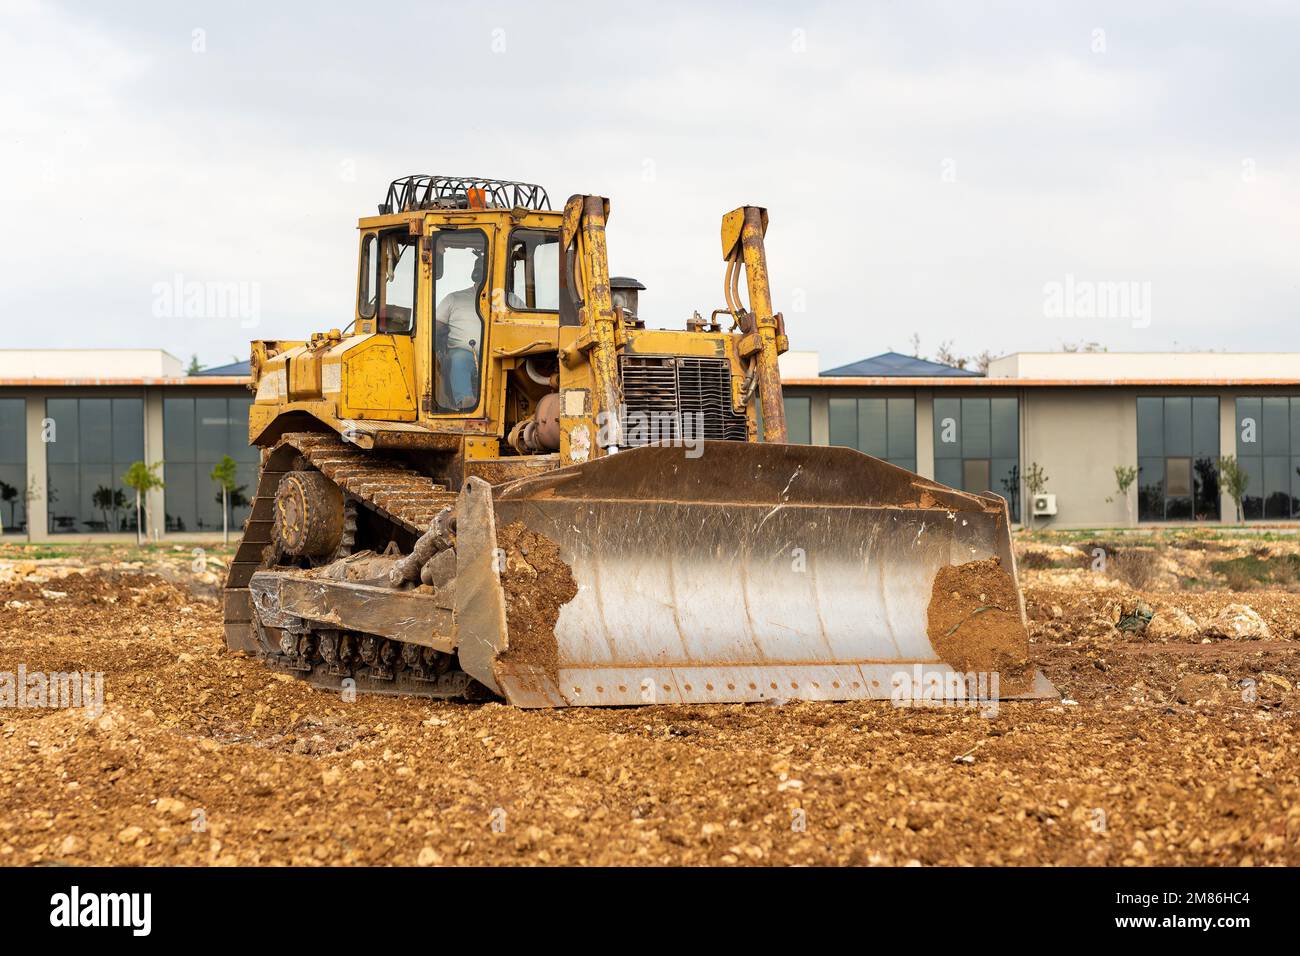 Dozer working at construction site. Bulldozer for land clearing, grading, utility trenching and foundation digging. Crawler tractor and earth-moving e Stock Photo